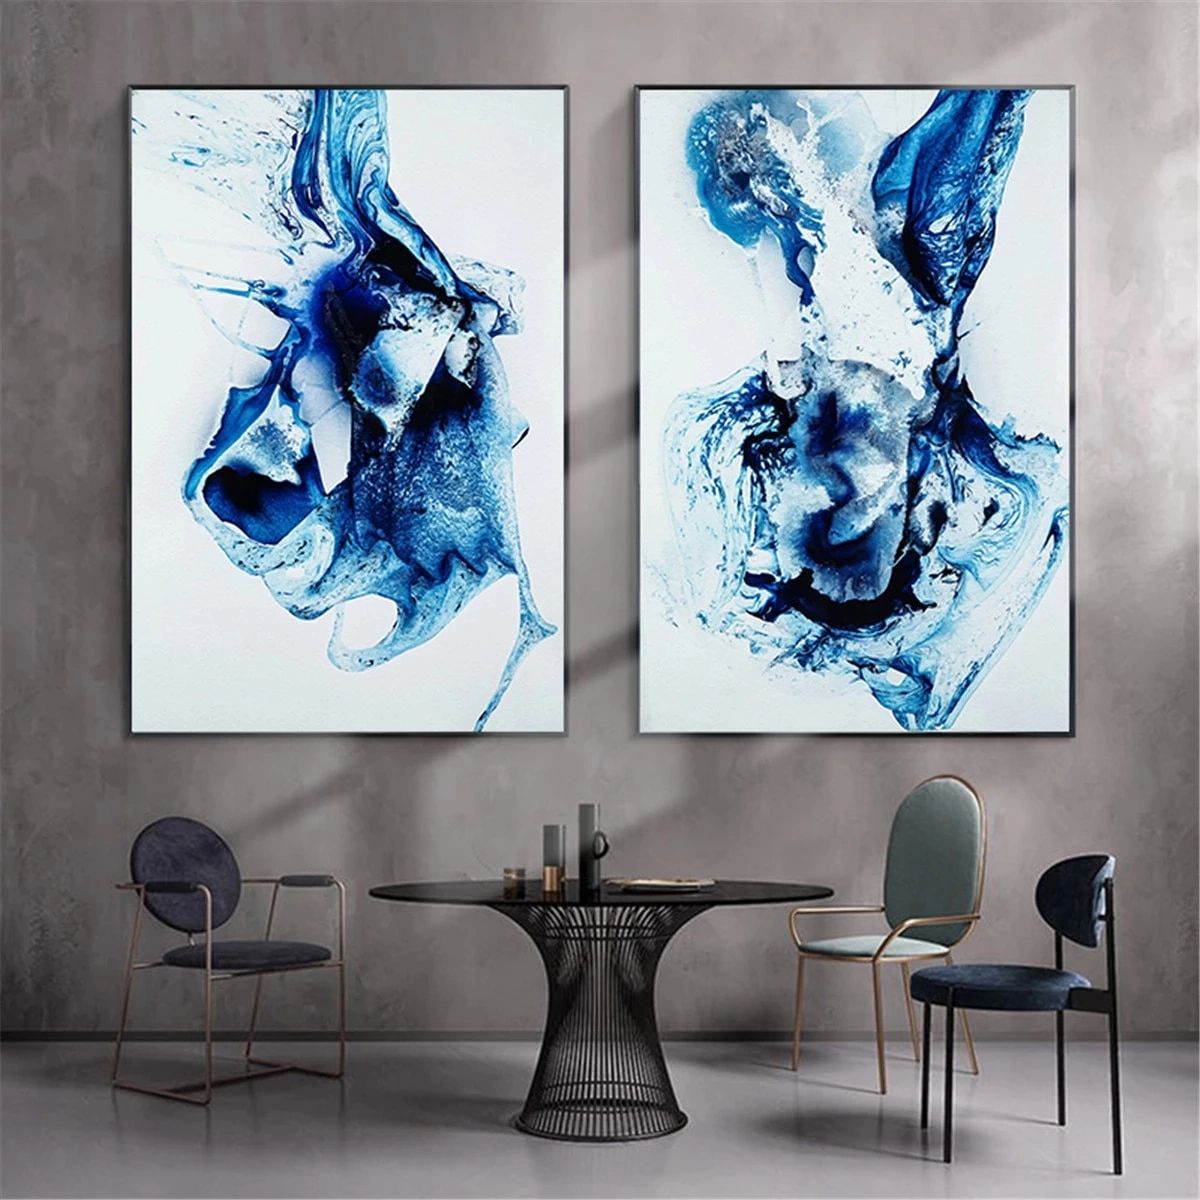 Modern Abstract Blue Splash Ink Painting Poster Canvas Print Painting Wall  Art Living Room Home Decoration – Painting & Calligraphy – Aliexpress In Ink Art Wall Art (View 10 of 15)